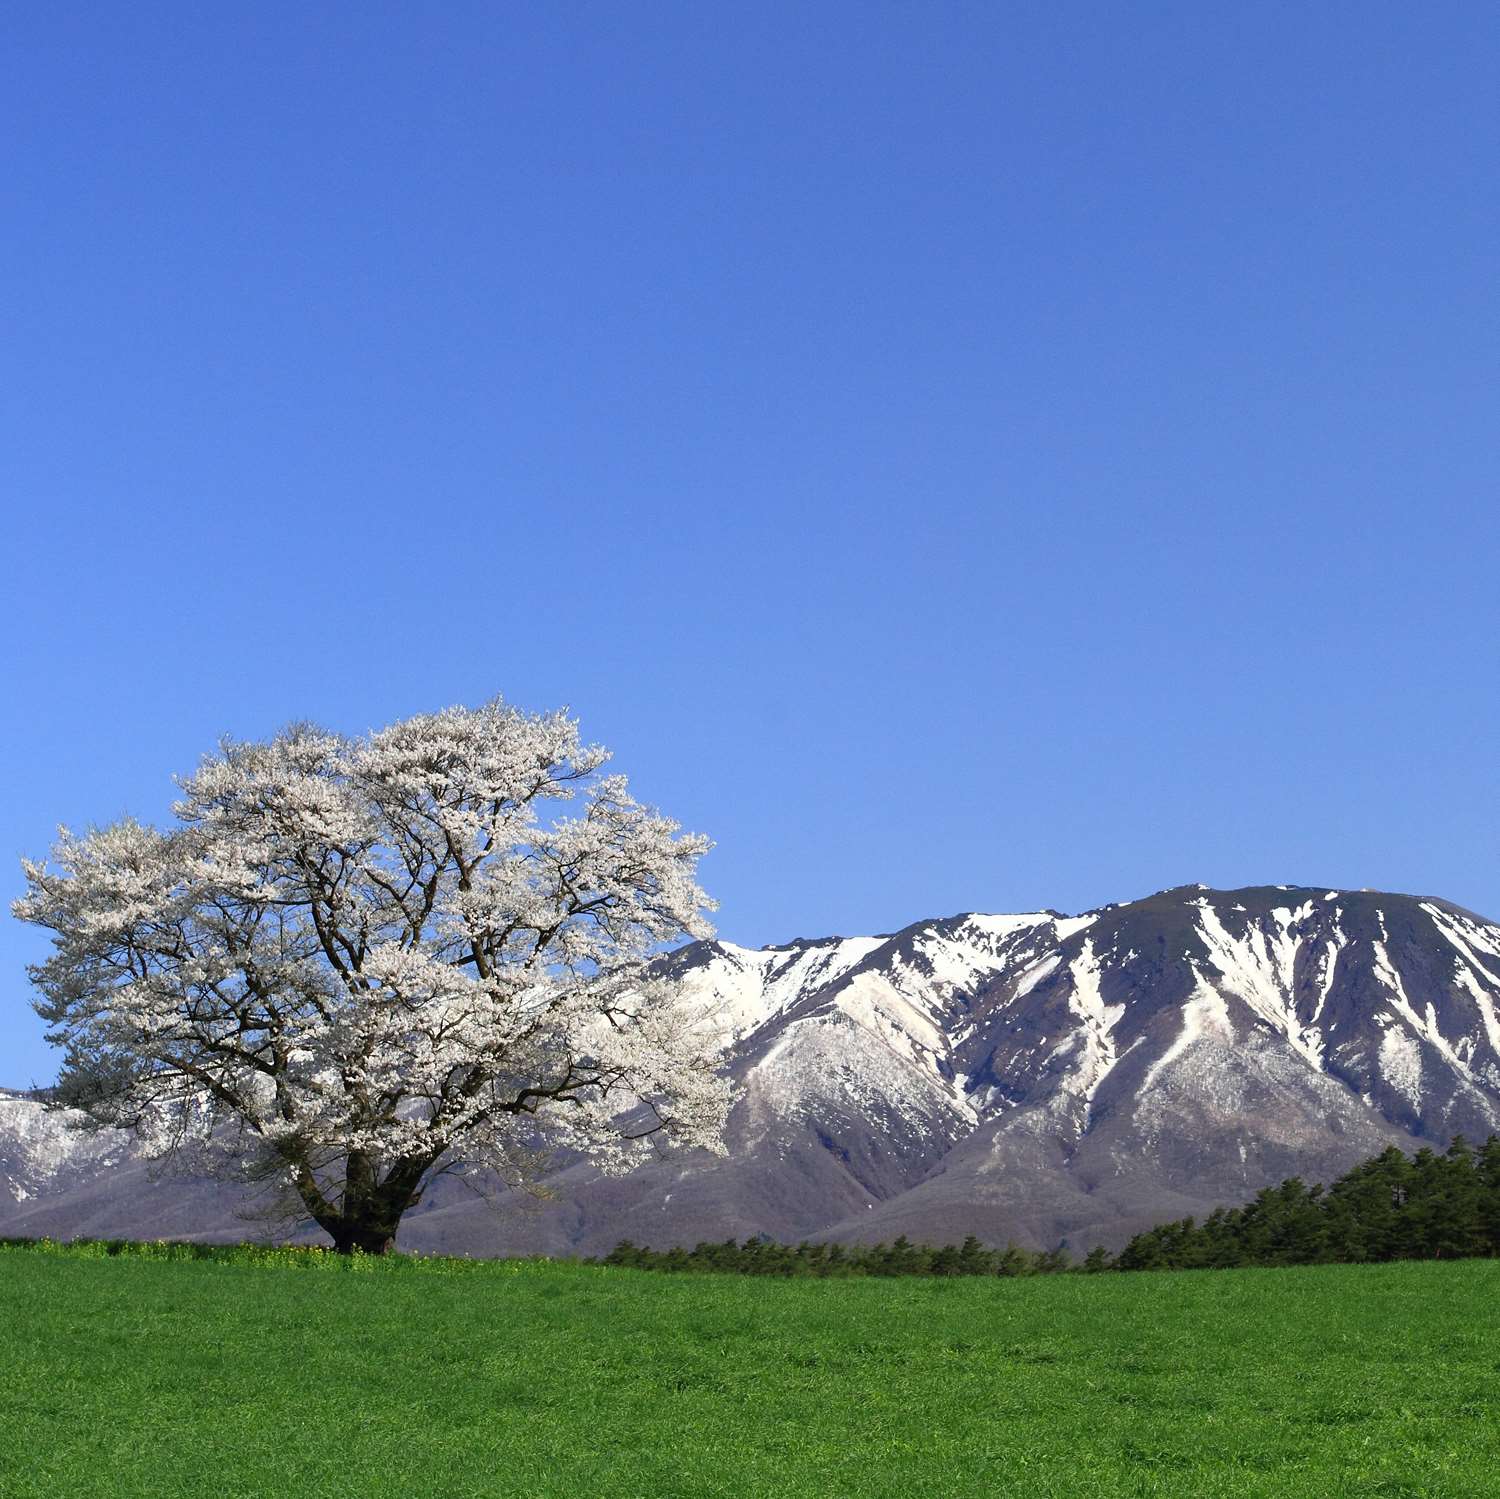 Koiwai Farm in Iwate Prefecture. The contrast between Mt. Iwaki and the giant cherry tree is beautiful = Shutterstock